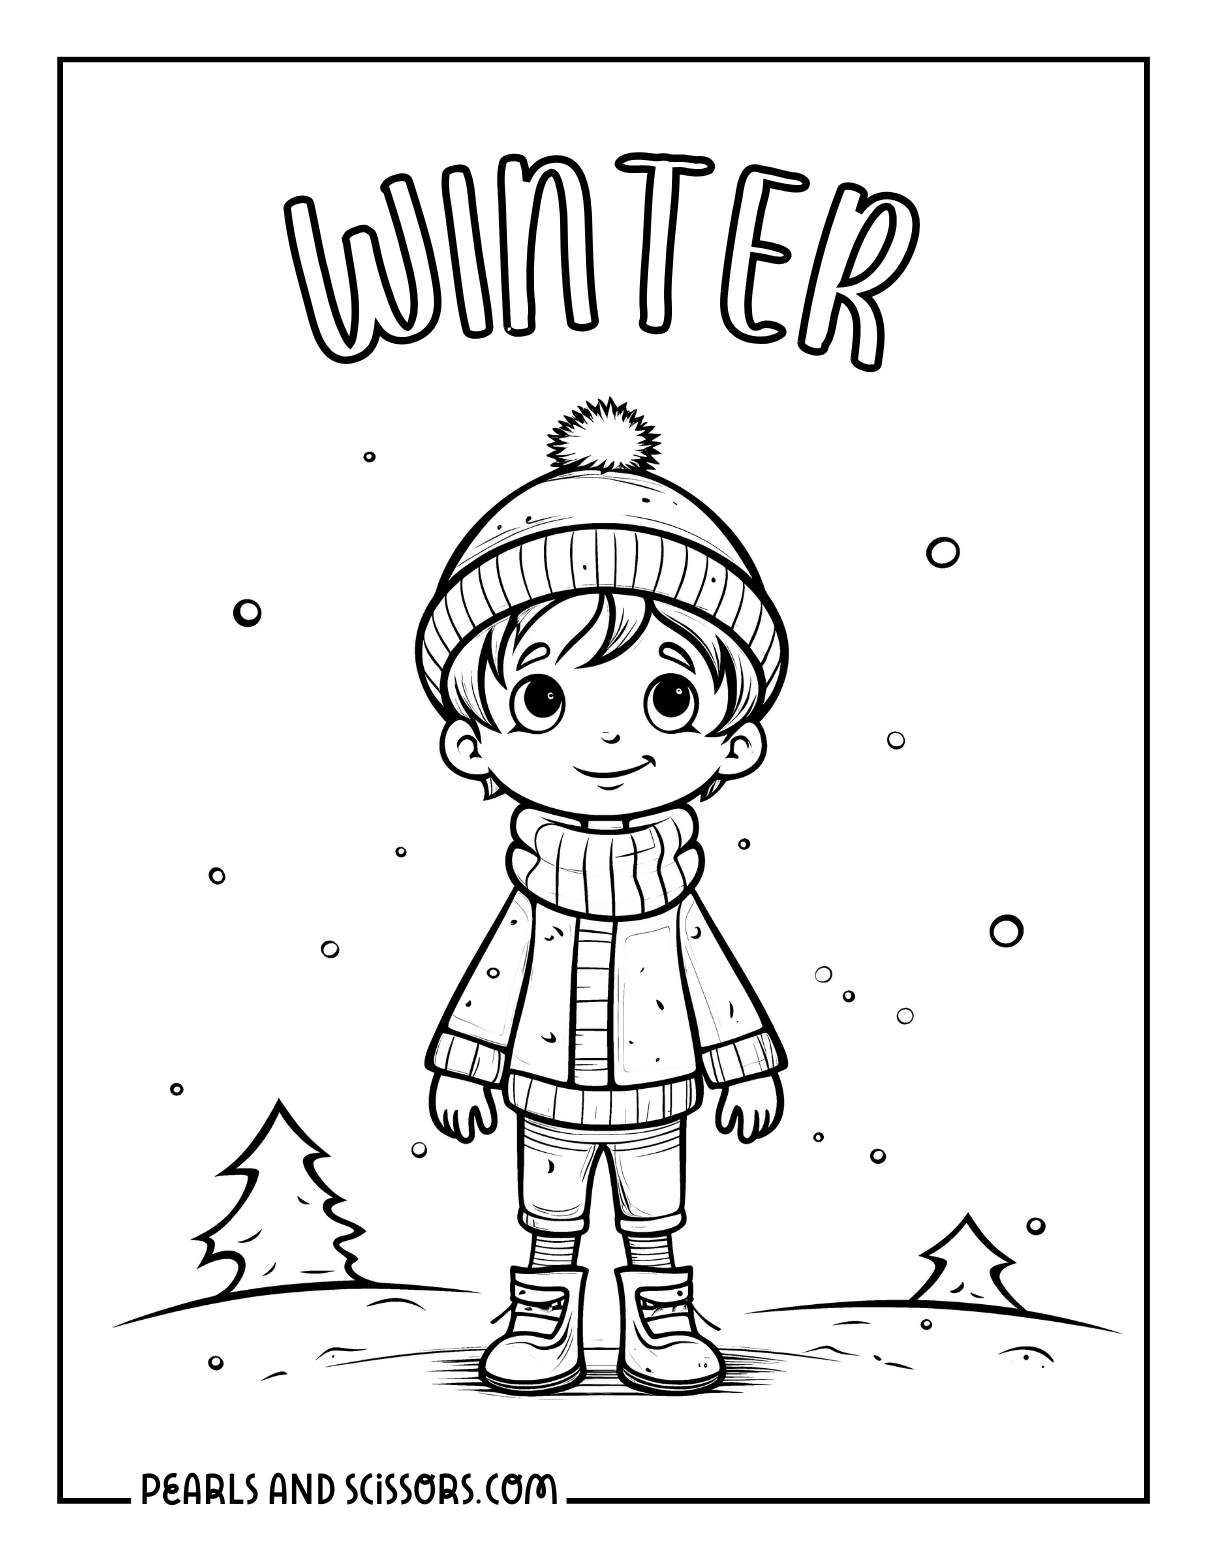 A boy wearing a winter clothes: a hat and scarf outside coloring sheet for kids,